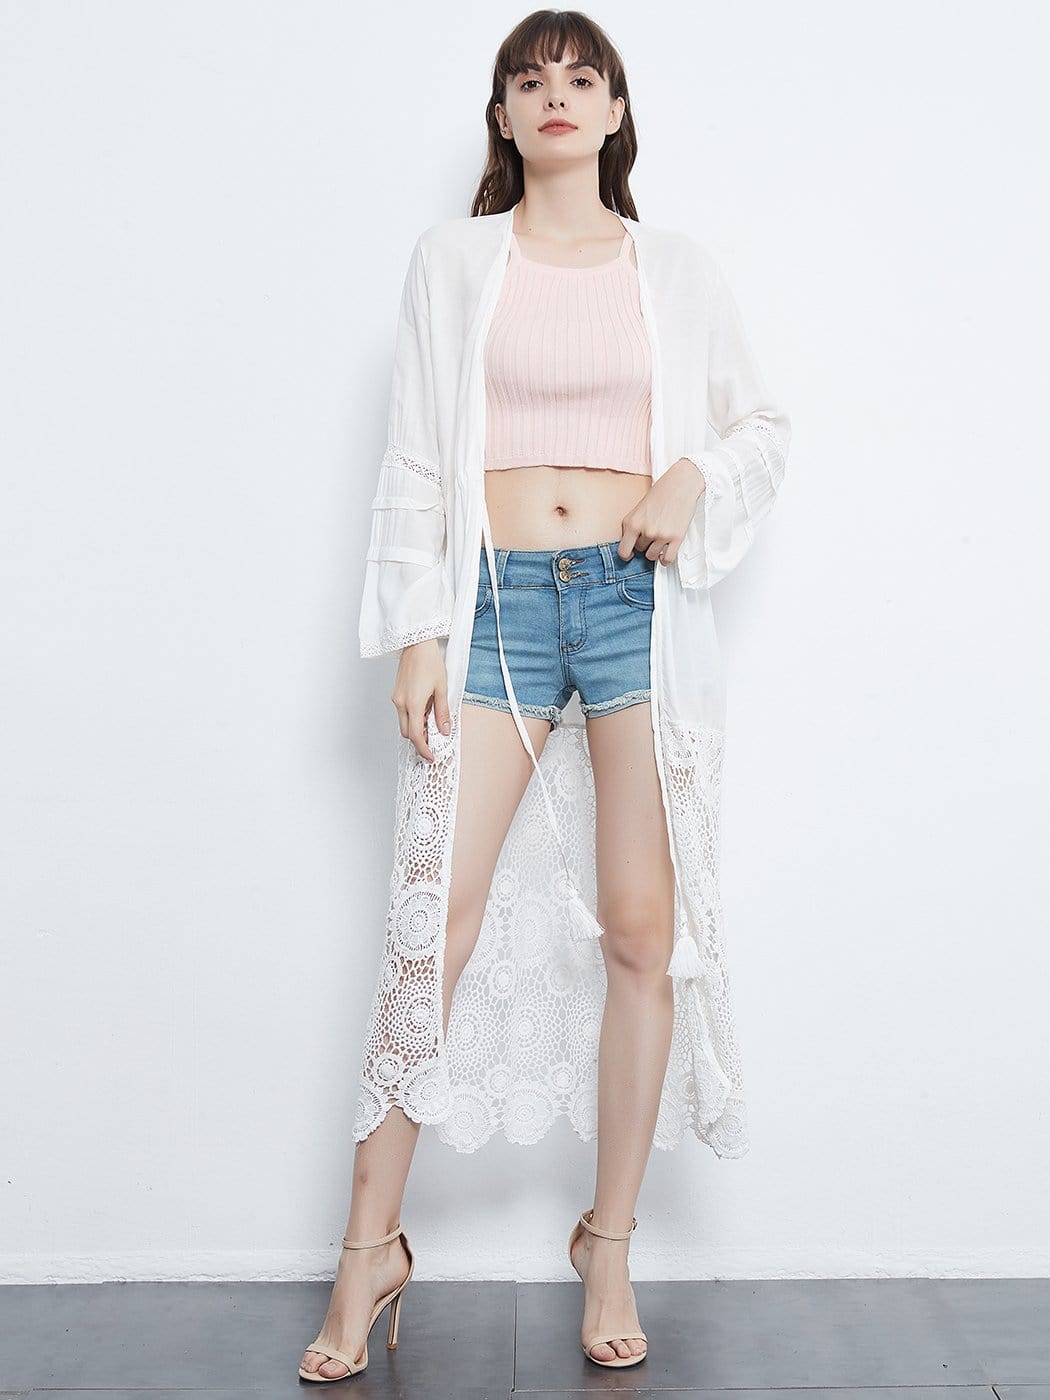 Lace Floral Crochet Embroidered Kimono Cardigan Long Sleeve